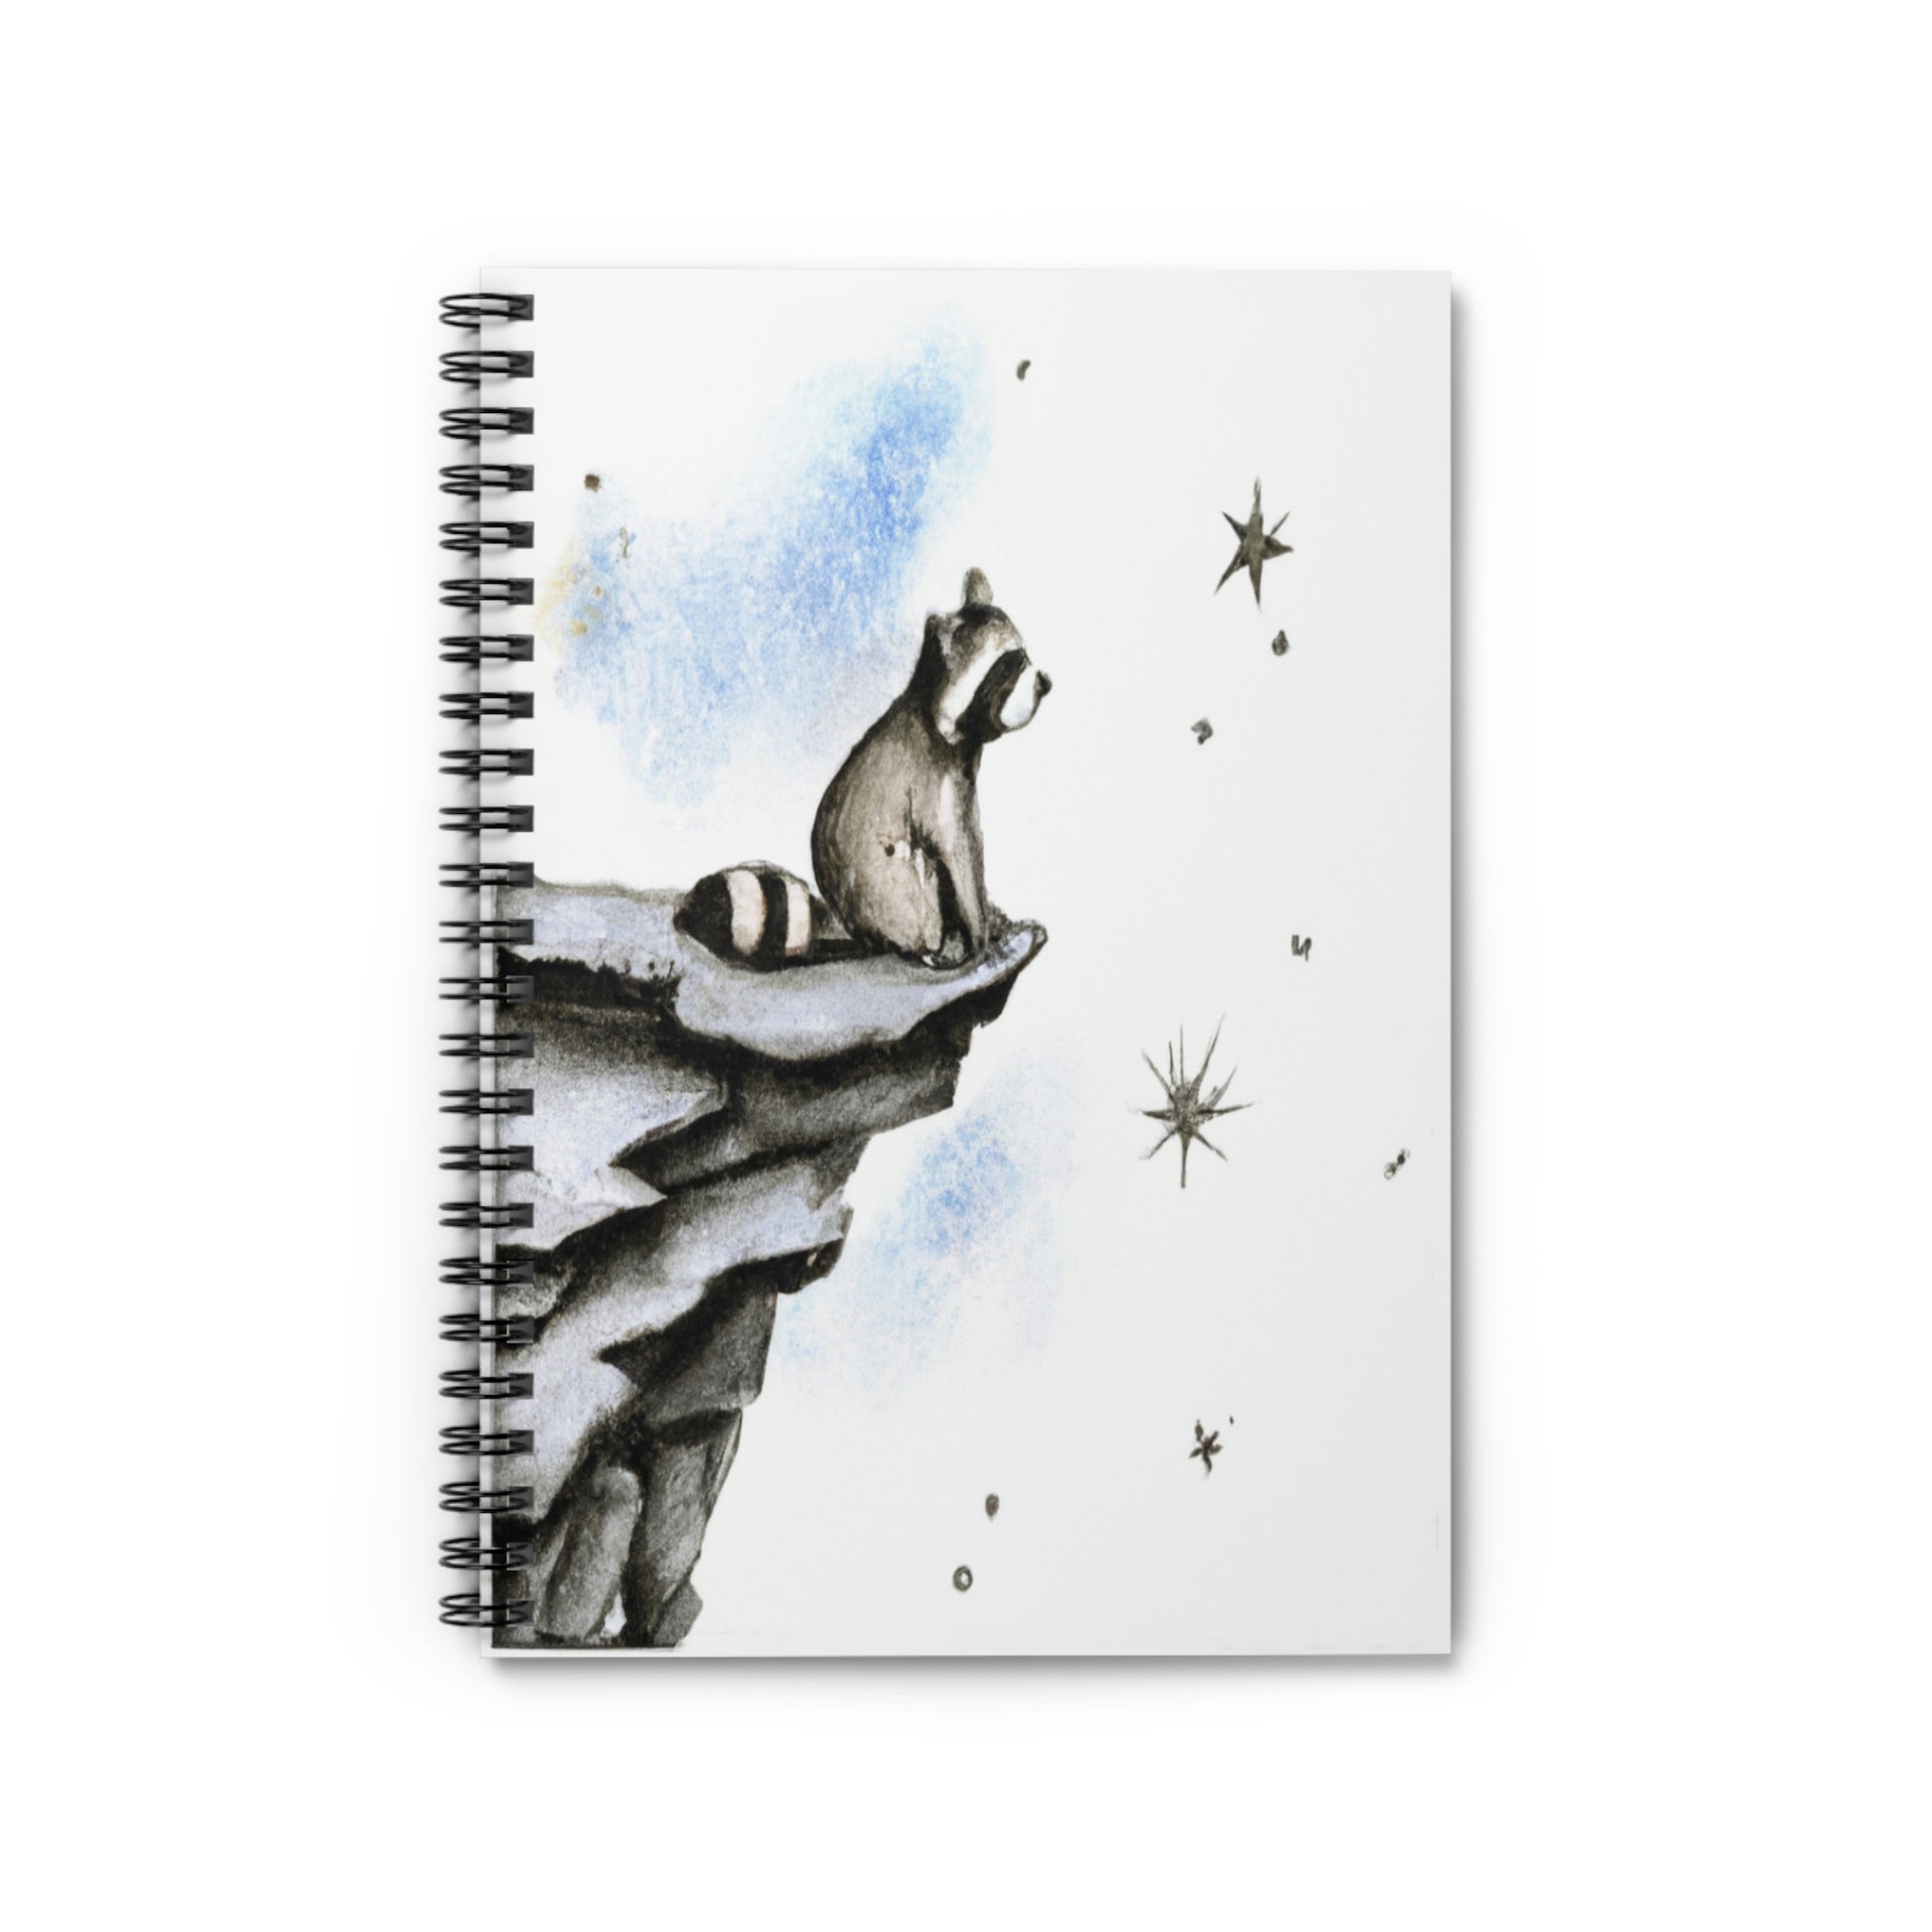 Riley Raccoon's Stellar Night Out Spiral Notebook - Raccoon Paradise